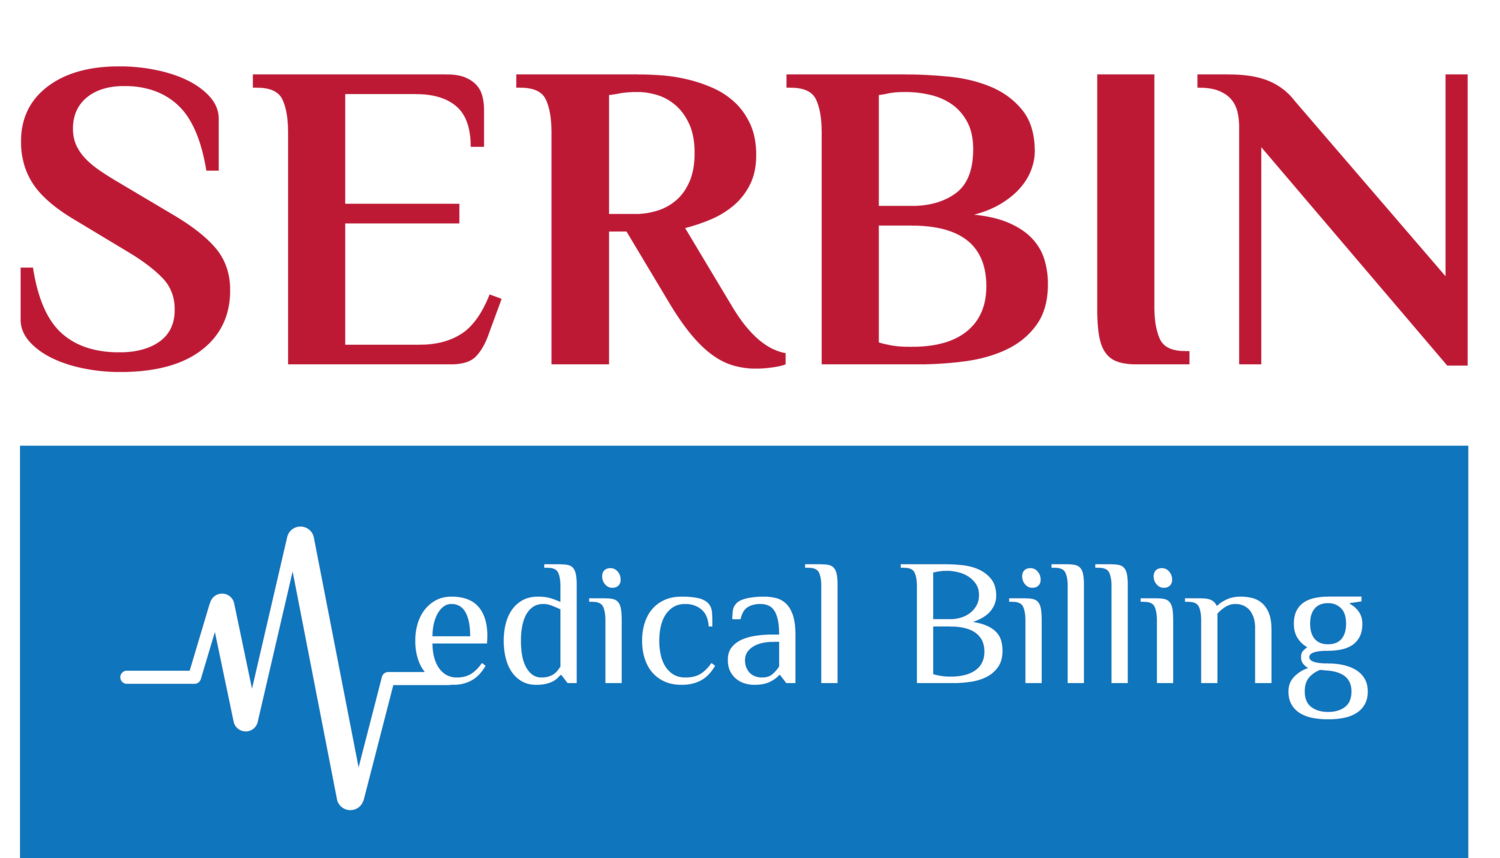 Serbin Medical Billing: Personalized ASC Revenue Cycle Services